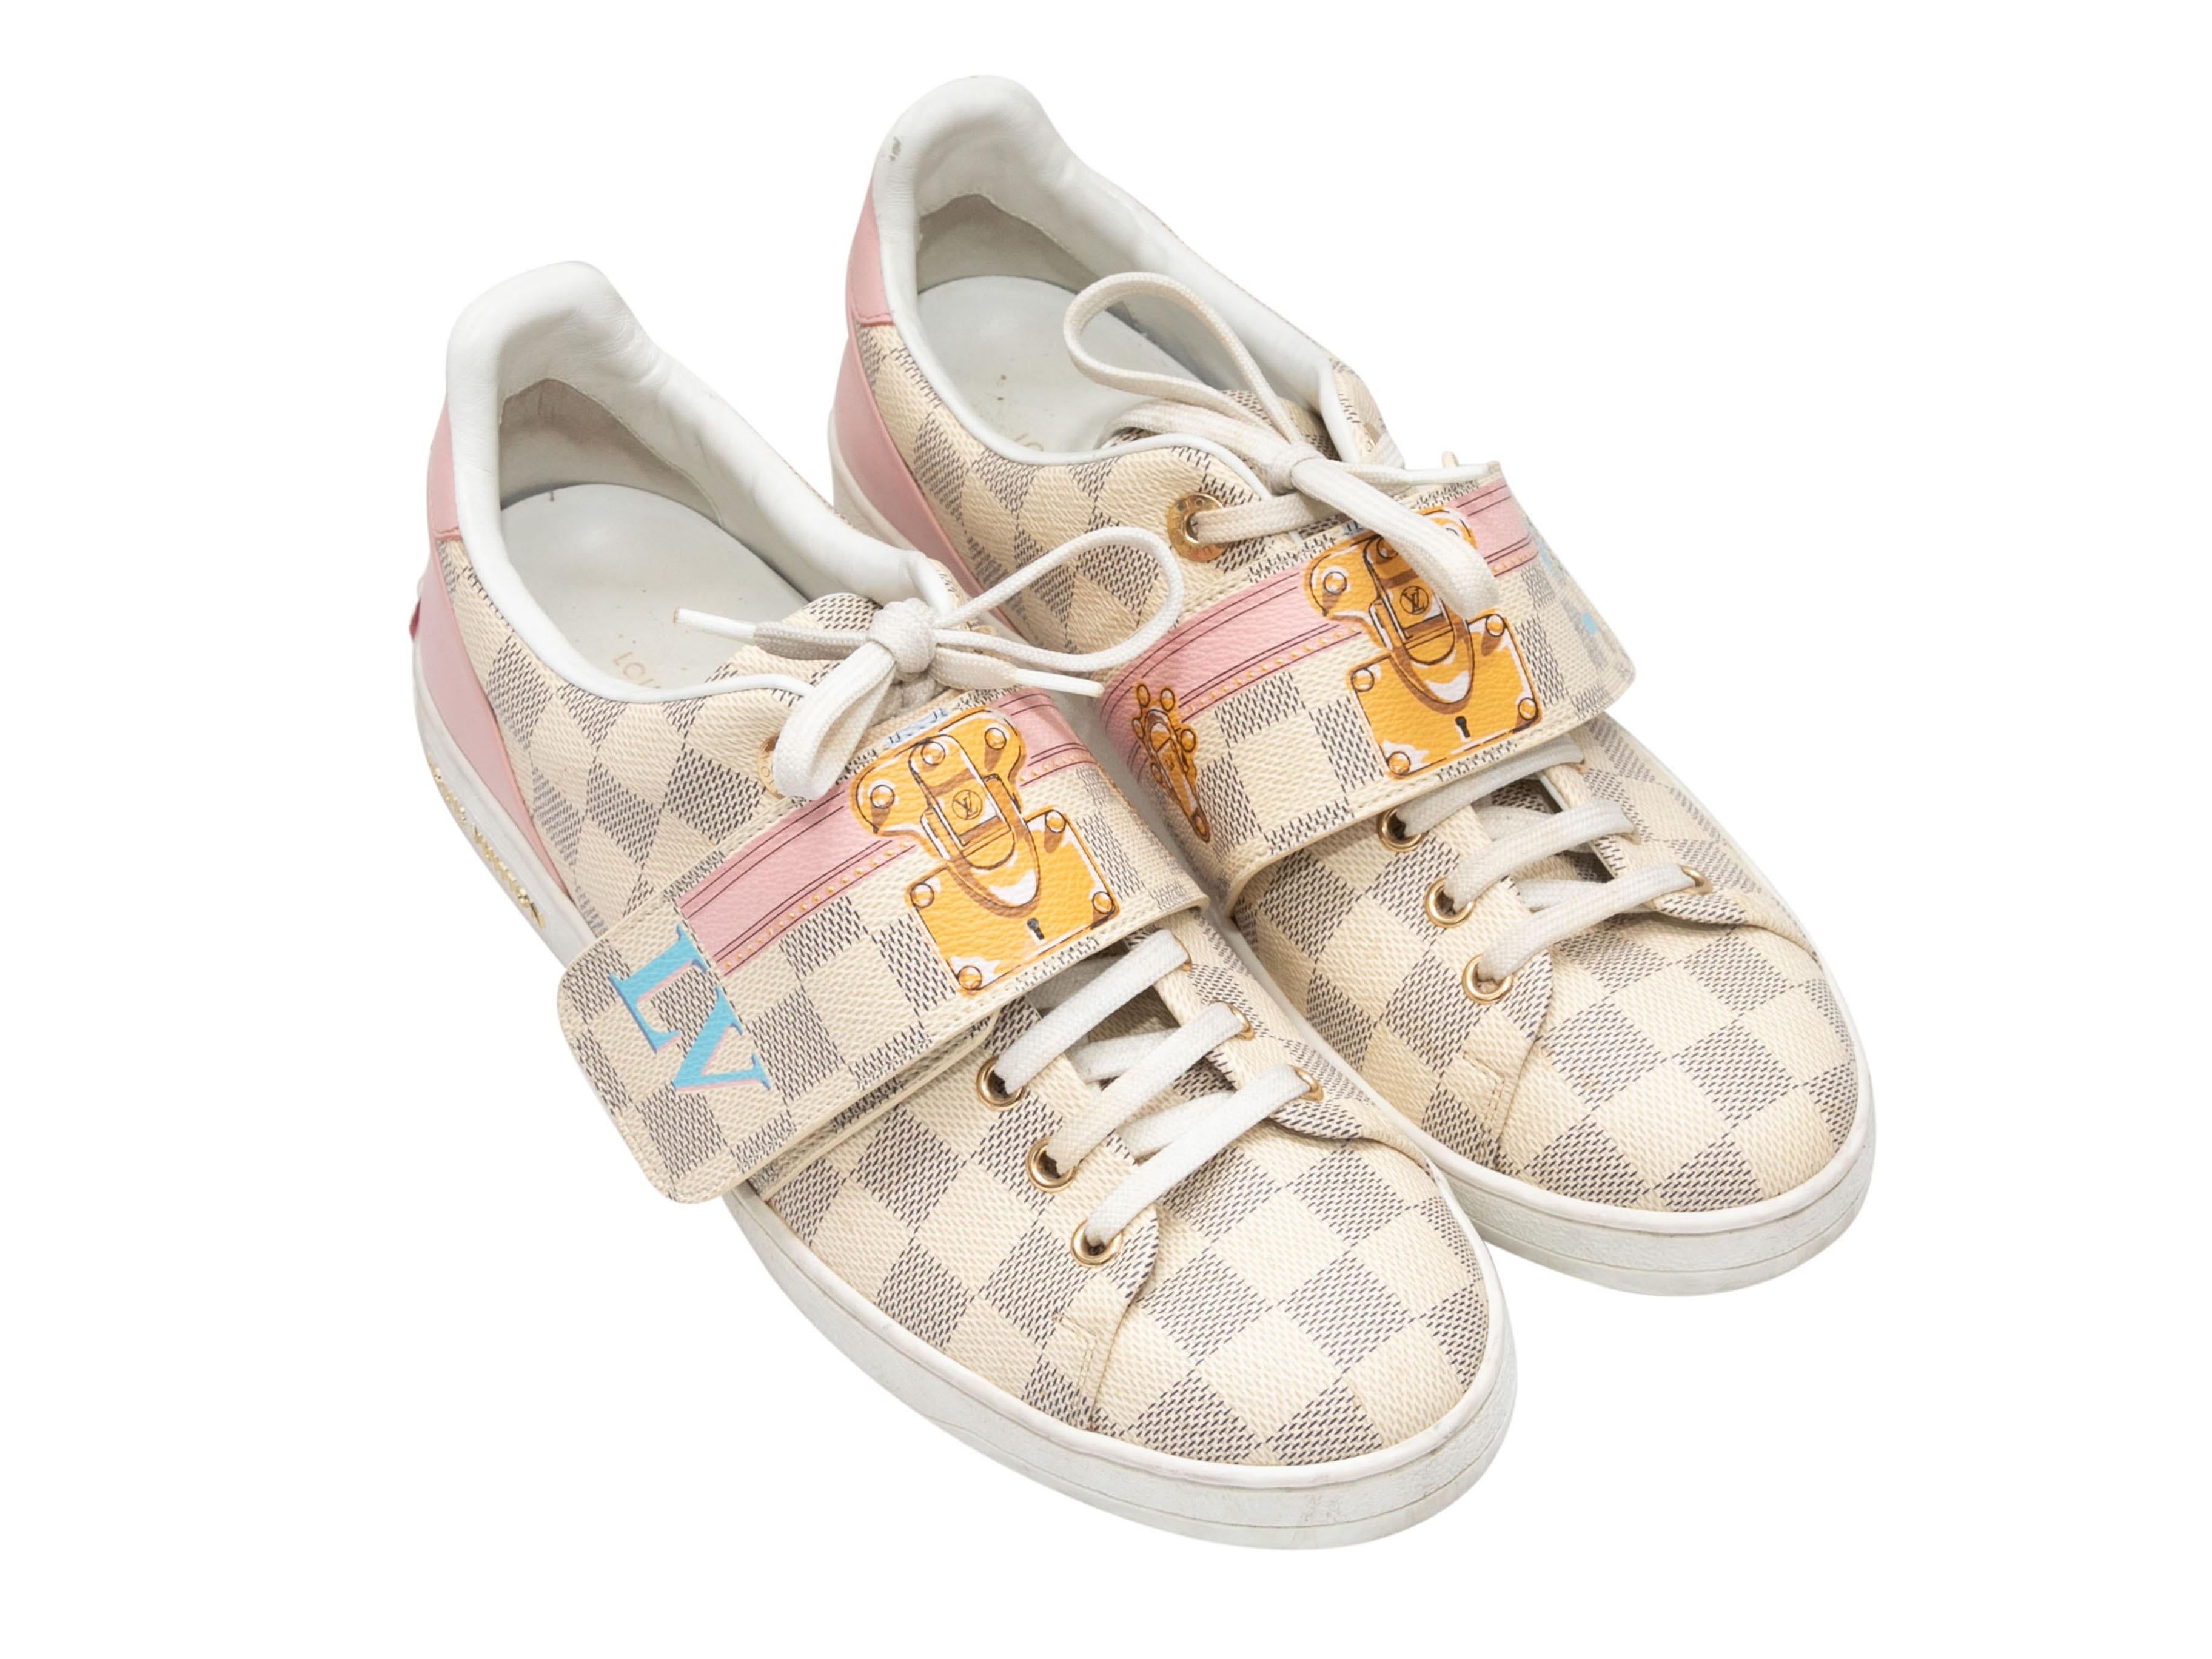 Cream & Multicolor Louis Vuitton Damier Azur Luggage Motif Sneakers Size 39 In Good Condition For Sale In New York, NY